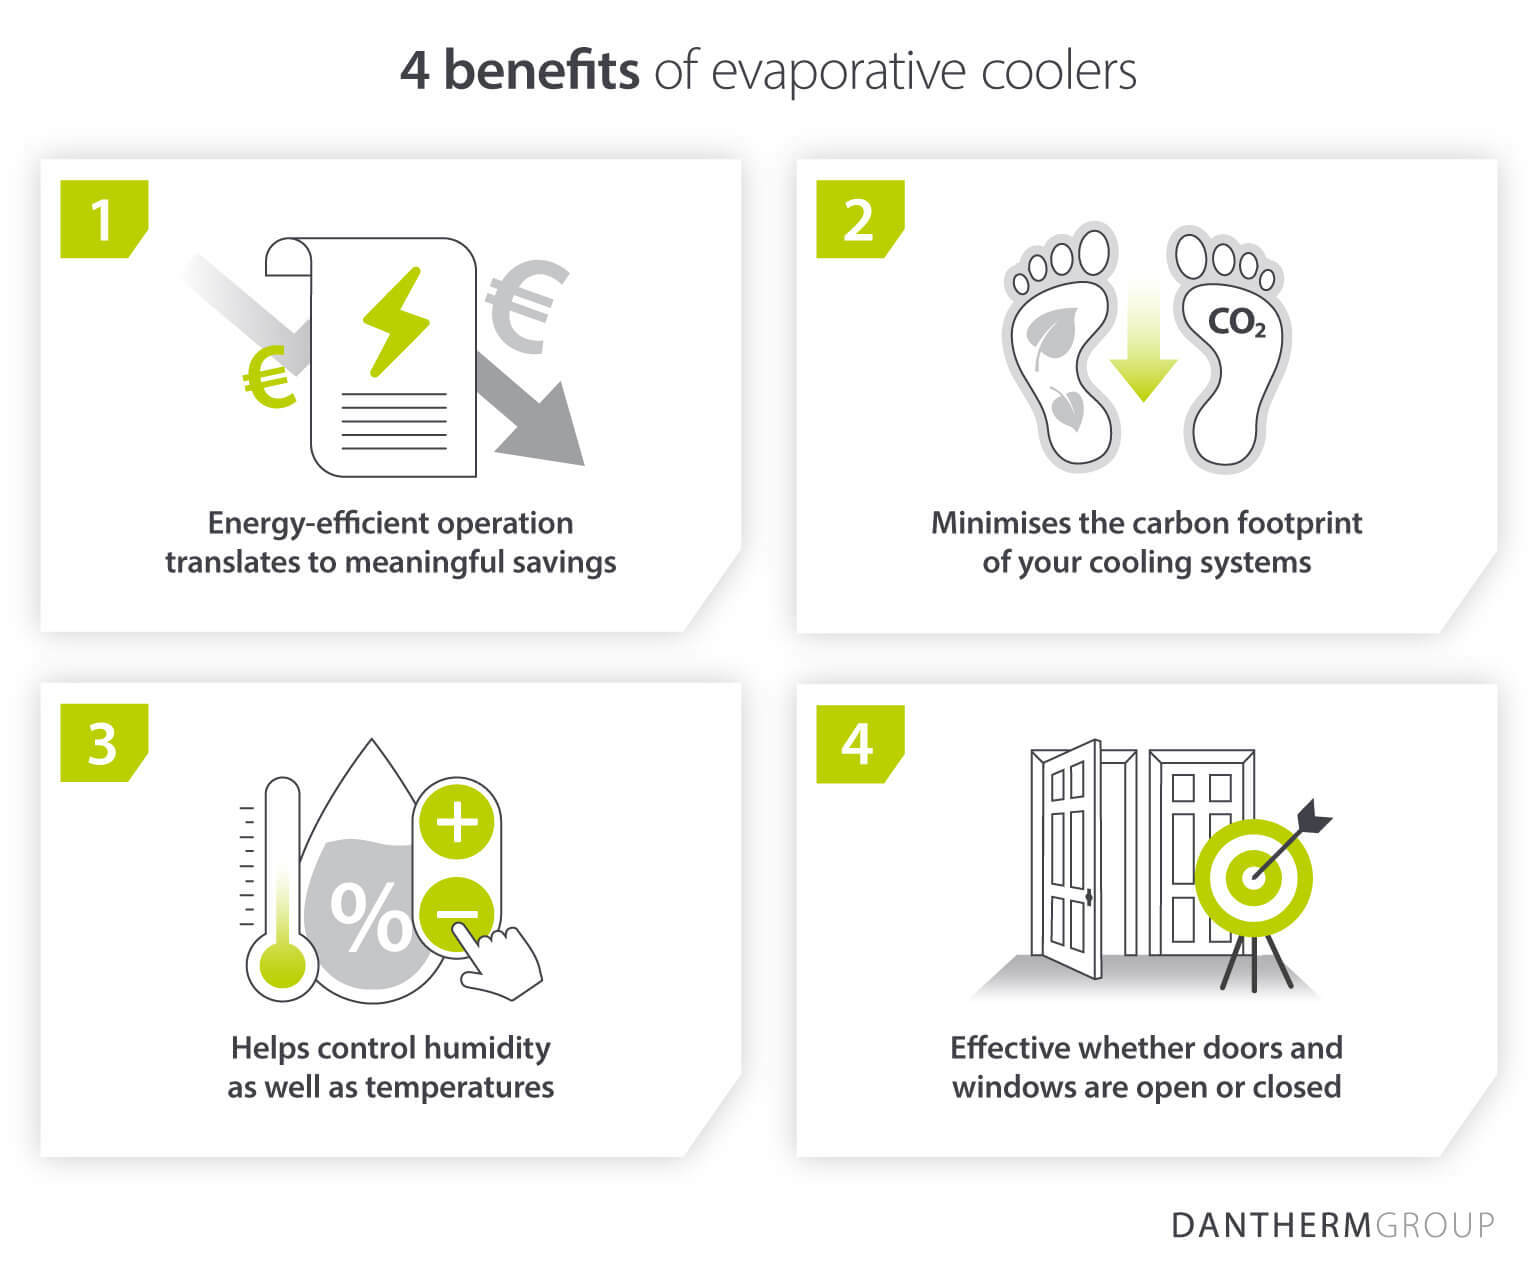 4 benefits of evaporative cooling and using evaporative coolers - Infographic image